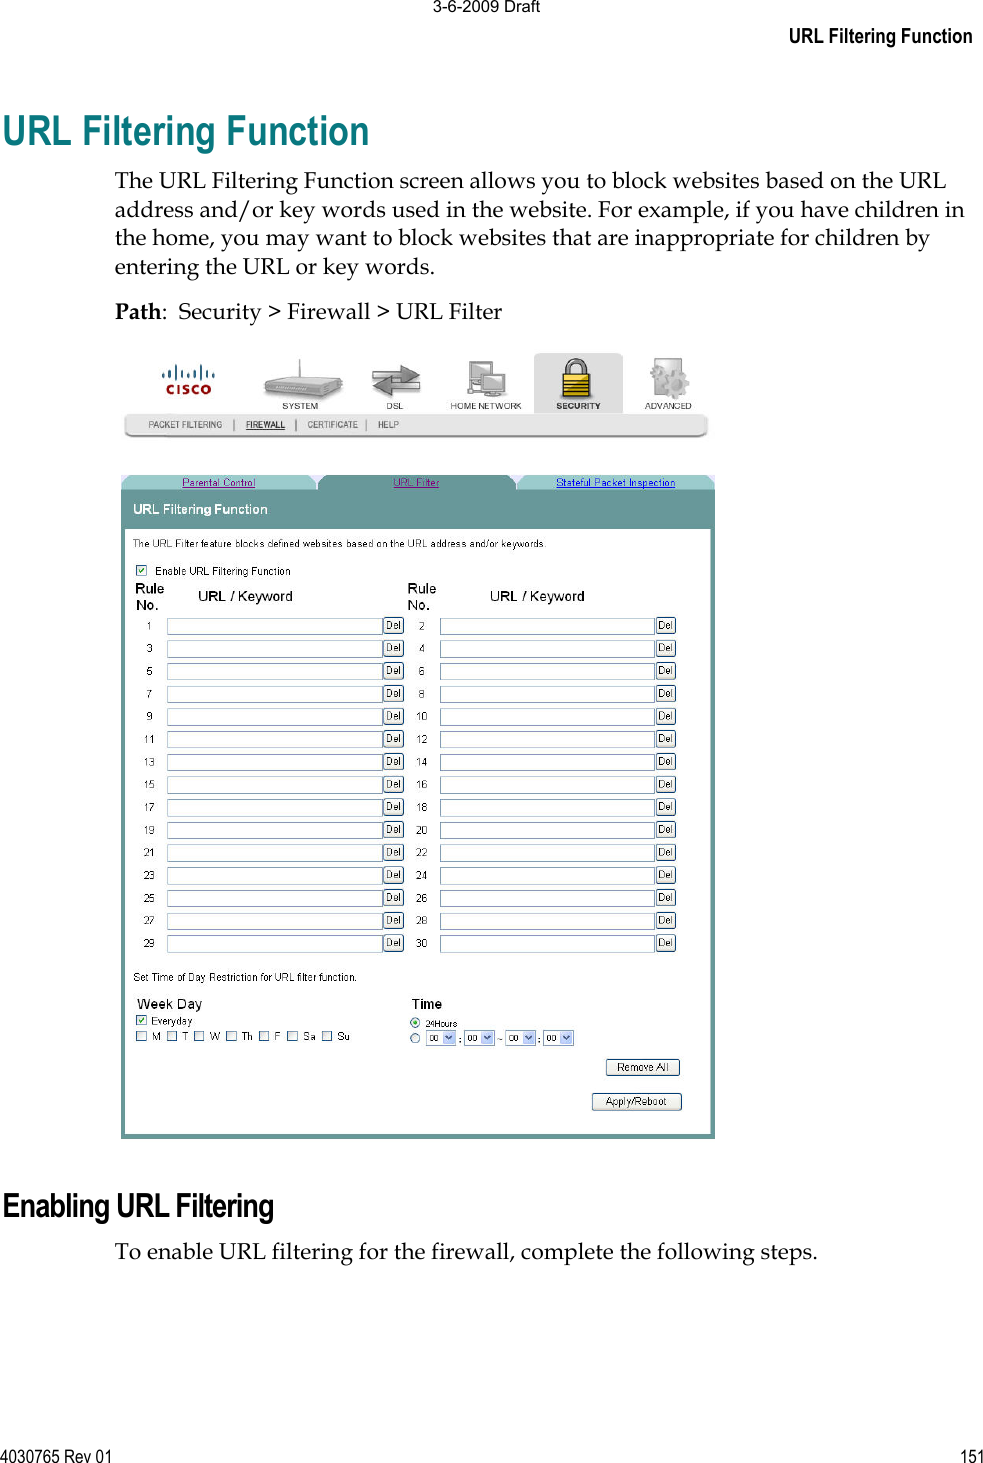 URL Filtering Function4030765 Rev 01 151URL Filtering Function The URL Filtering Function screen allows you to block websites based on the URL address and/or key words used in the website. For example, if you have children in the home, you may want to block websites that are inappropriate for children by entering the URL or key words.  Path:  Security &gt; Firewall &gt; URL Filter Enabling URL Filtering To enable URL filtering for the firewall, complete the following steps.  3-6-2009 Draft